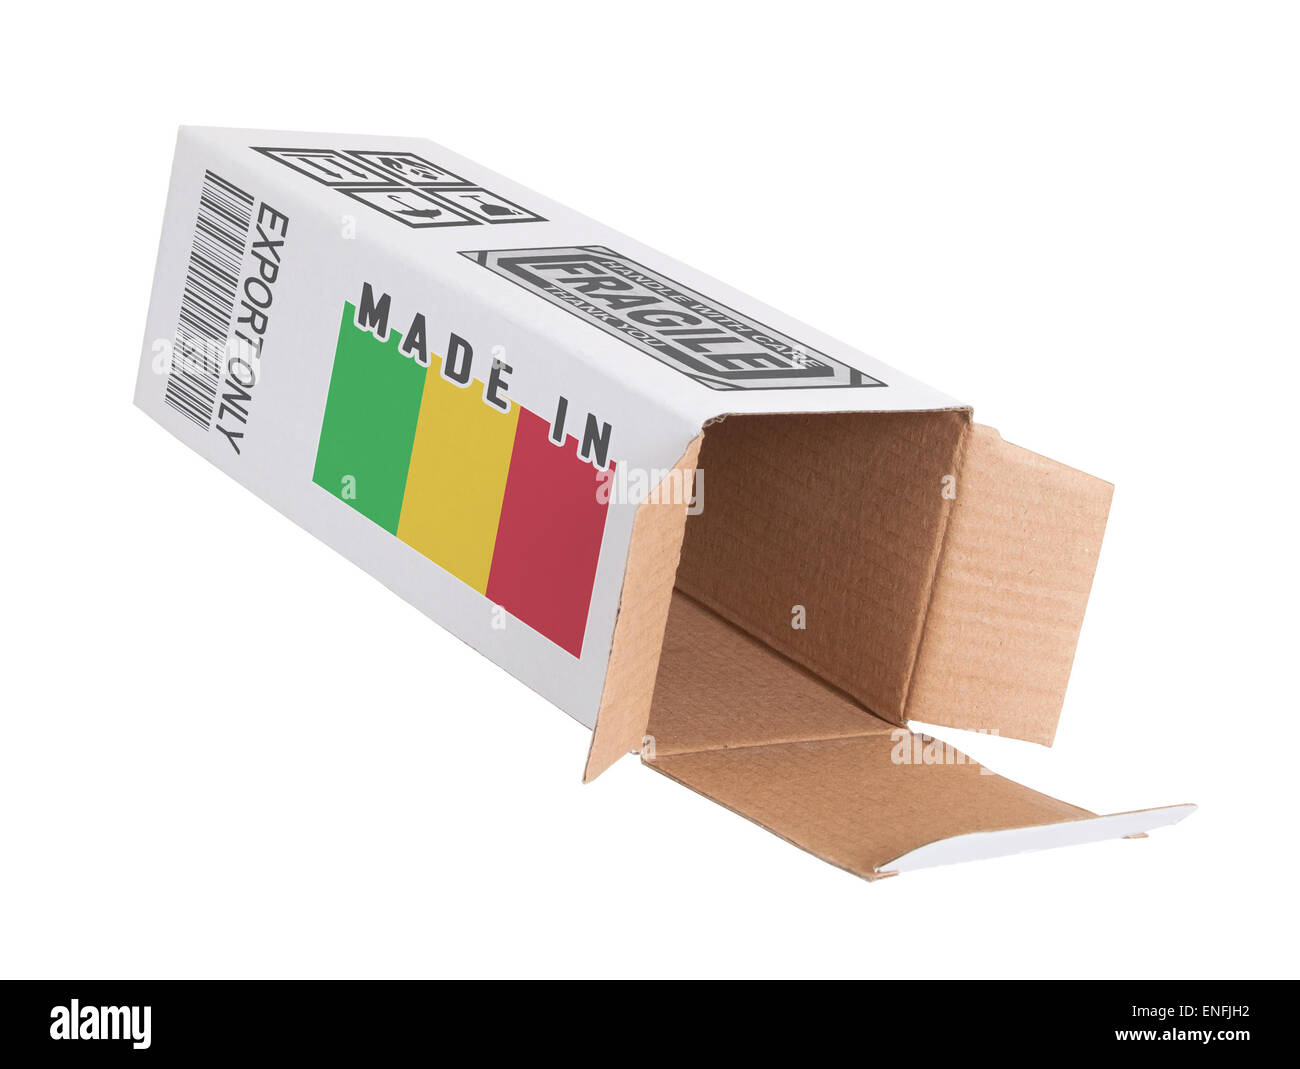 Concept of export, opened paper box - Product of Mali Stock Photo